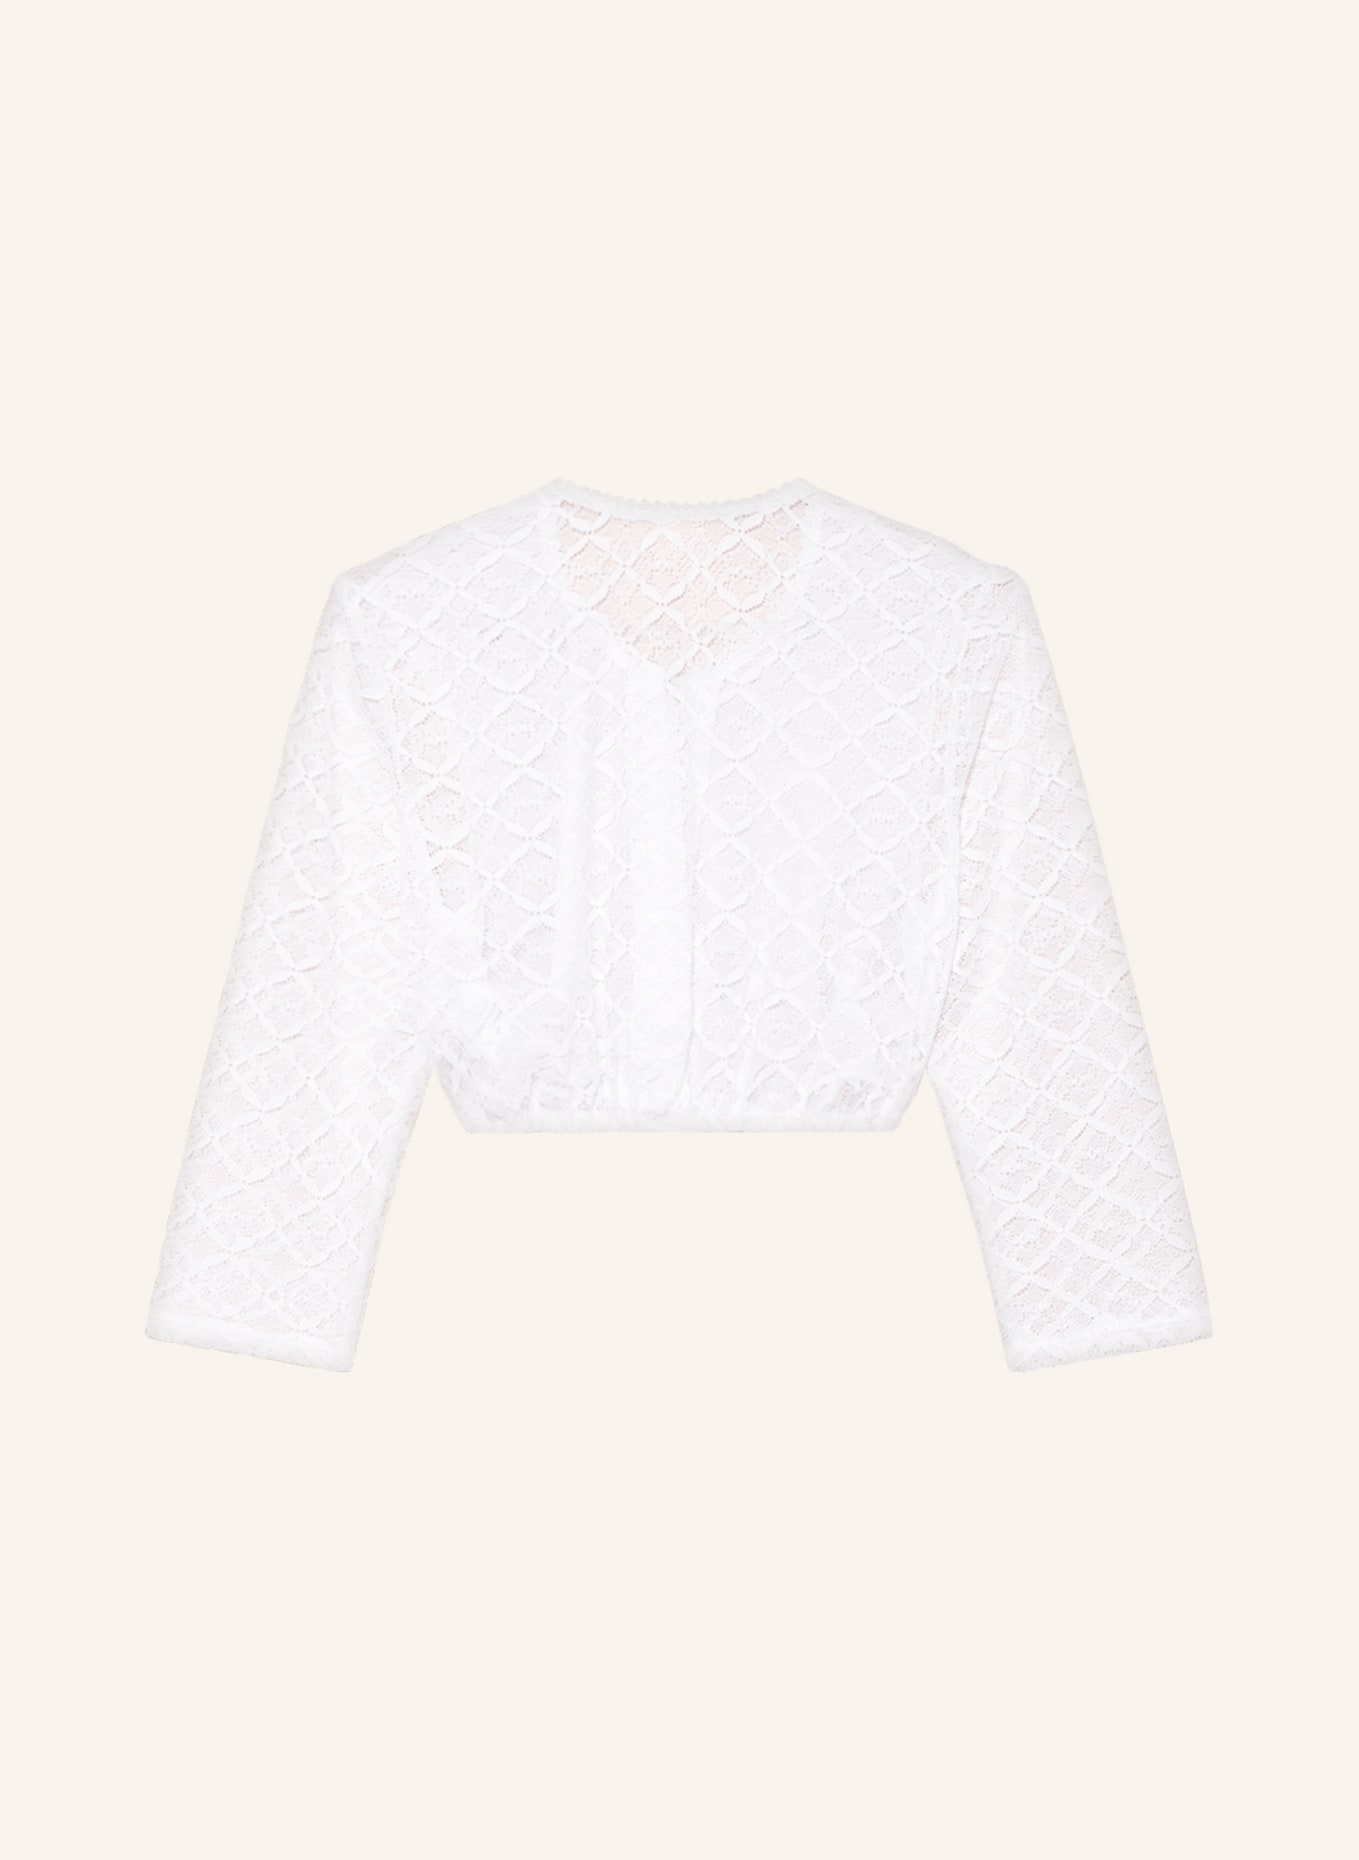 WALDORFF Dirndl blouse in lace with 3/4 sleeves, Color: WHITE (Image 2)